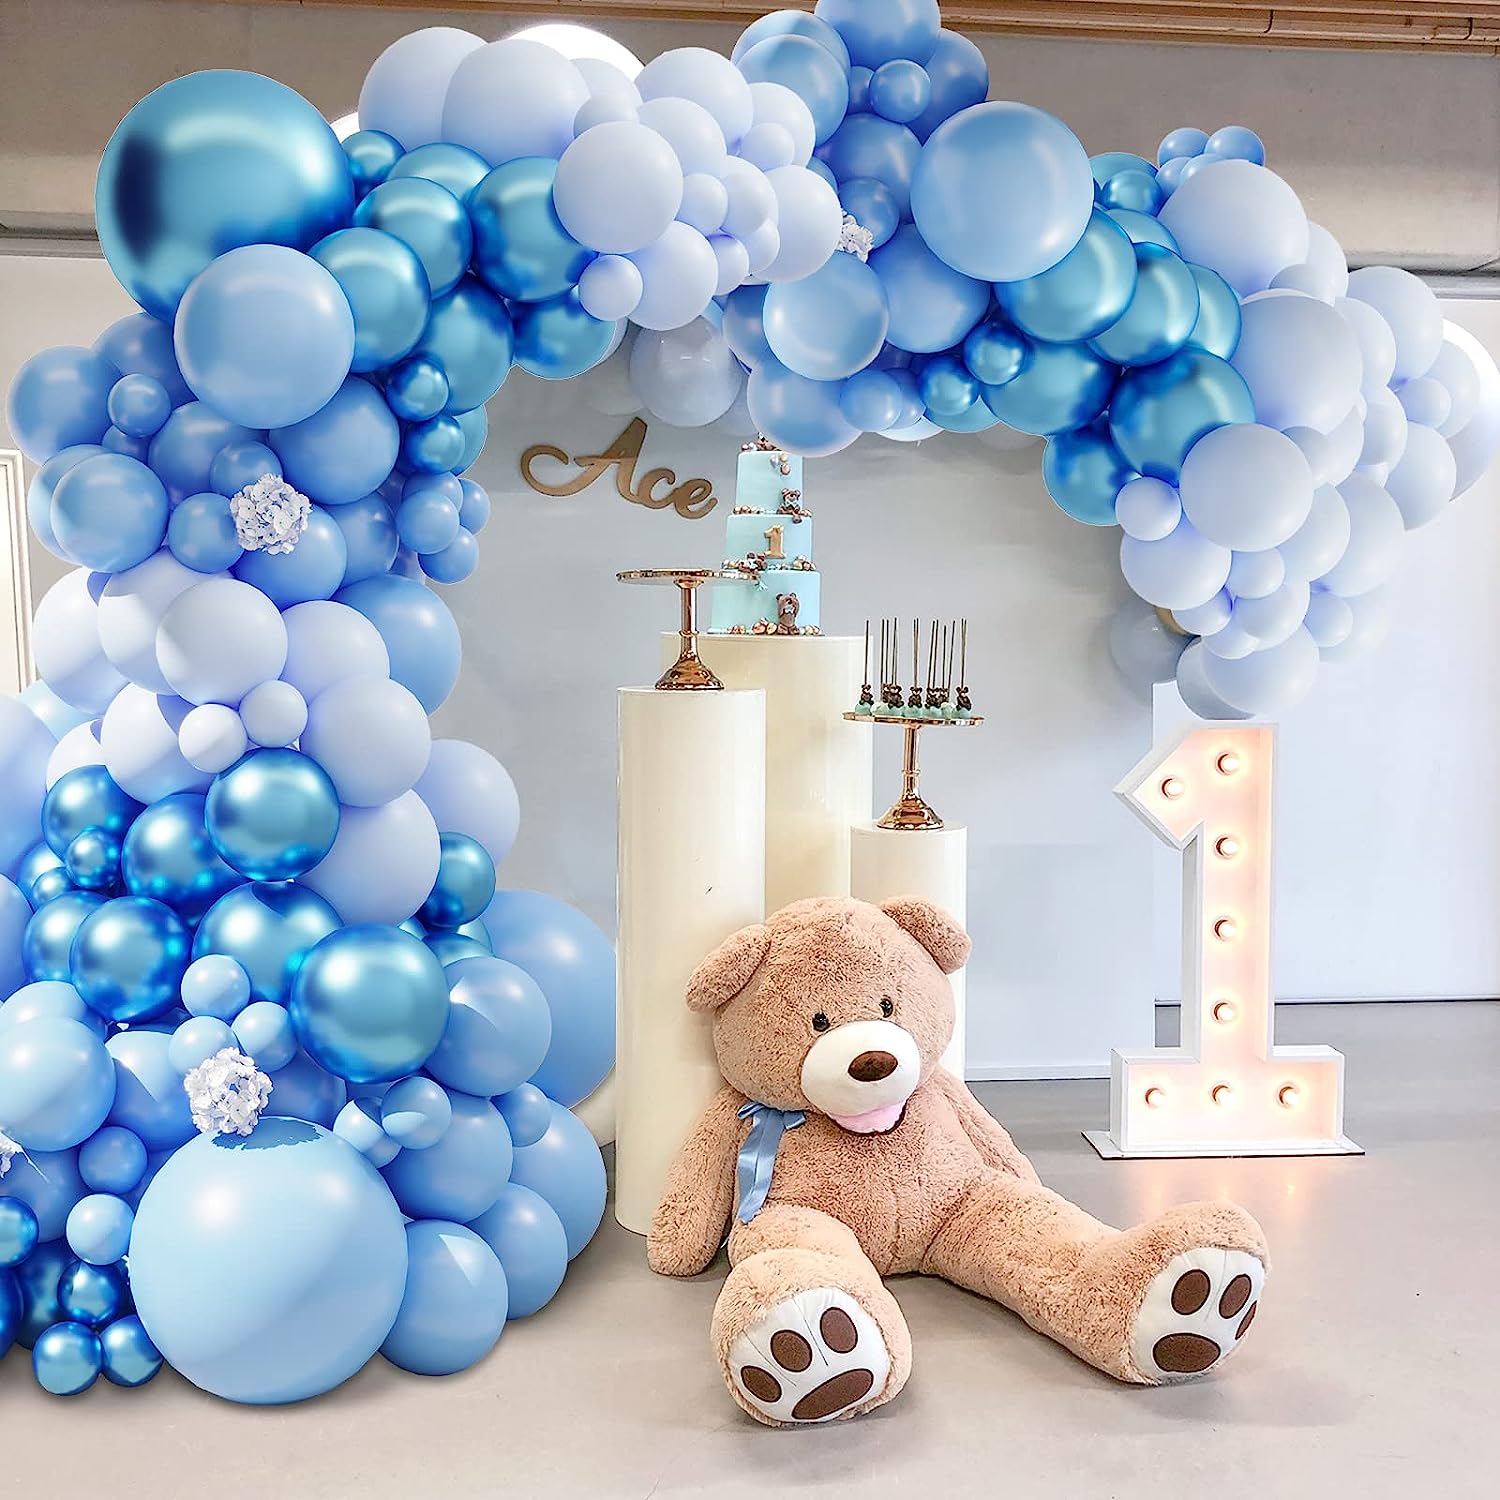 Rose Morning X011: Blue balloon set for happy birthday, wedding anniversary, baby shower party decoration. Set includes 12&quot; and 16&quot; blue balloons, a blue balloon garland, and a blue balloon arch. Balloons are made of high quality latex that will not fade or crack. Balloon garlands and balloon arches are easy to assemble and can decorate your party venue in a variety of ways. This set of balloons is the perfect addition to any party and will impress your guests.